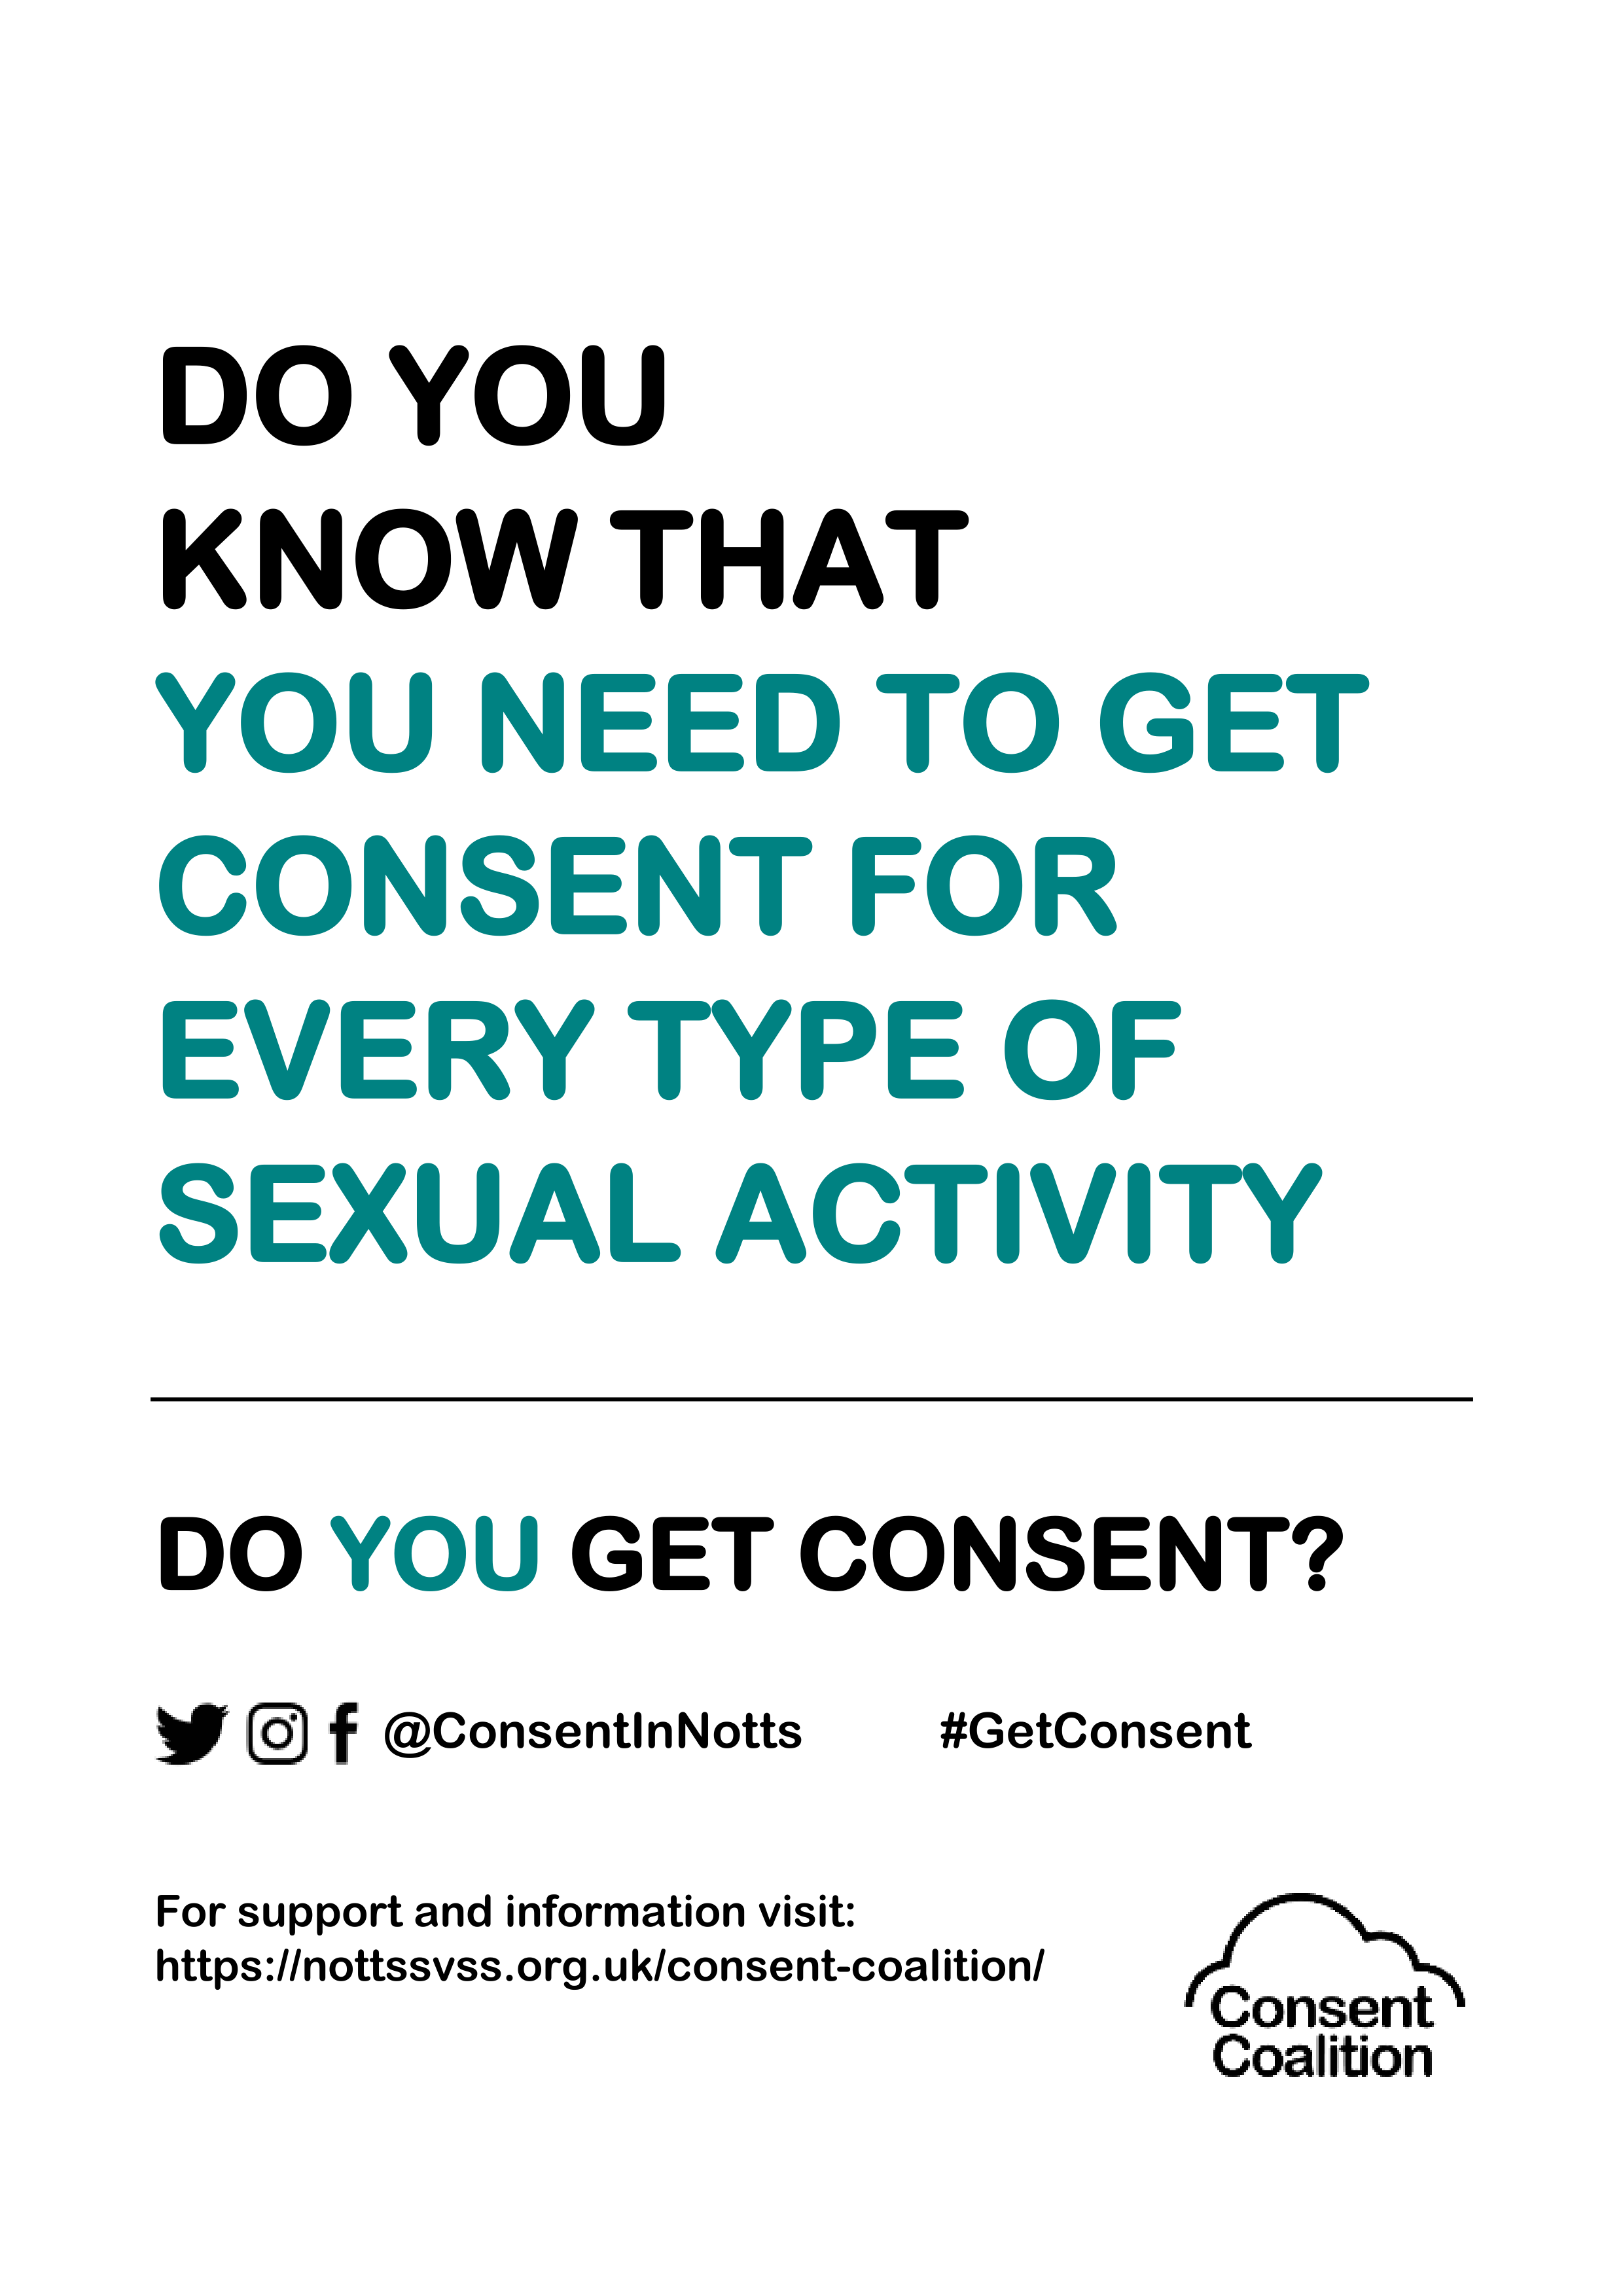 Consent Coalition Consent For Every Type Of Activity Notts Svs Services